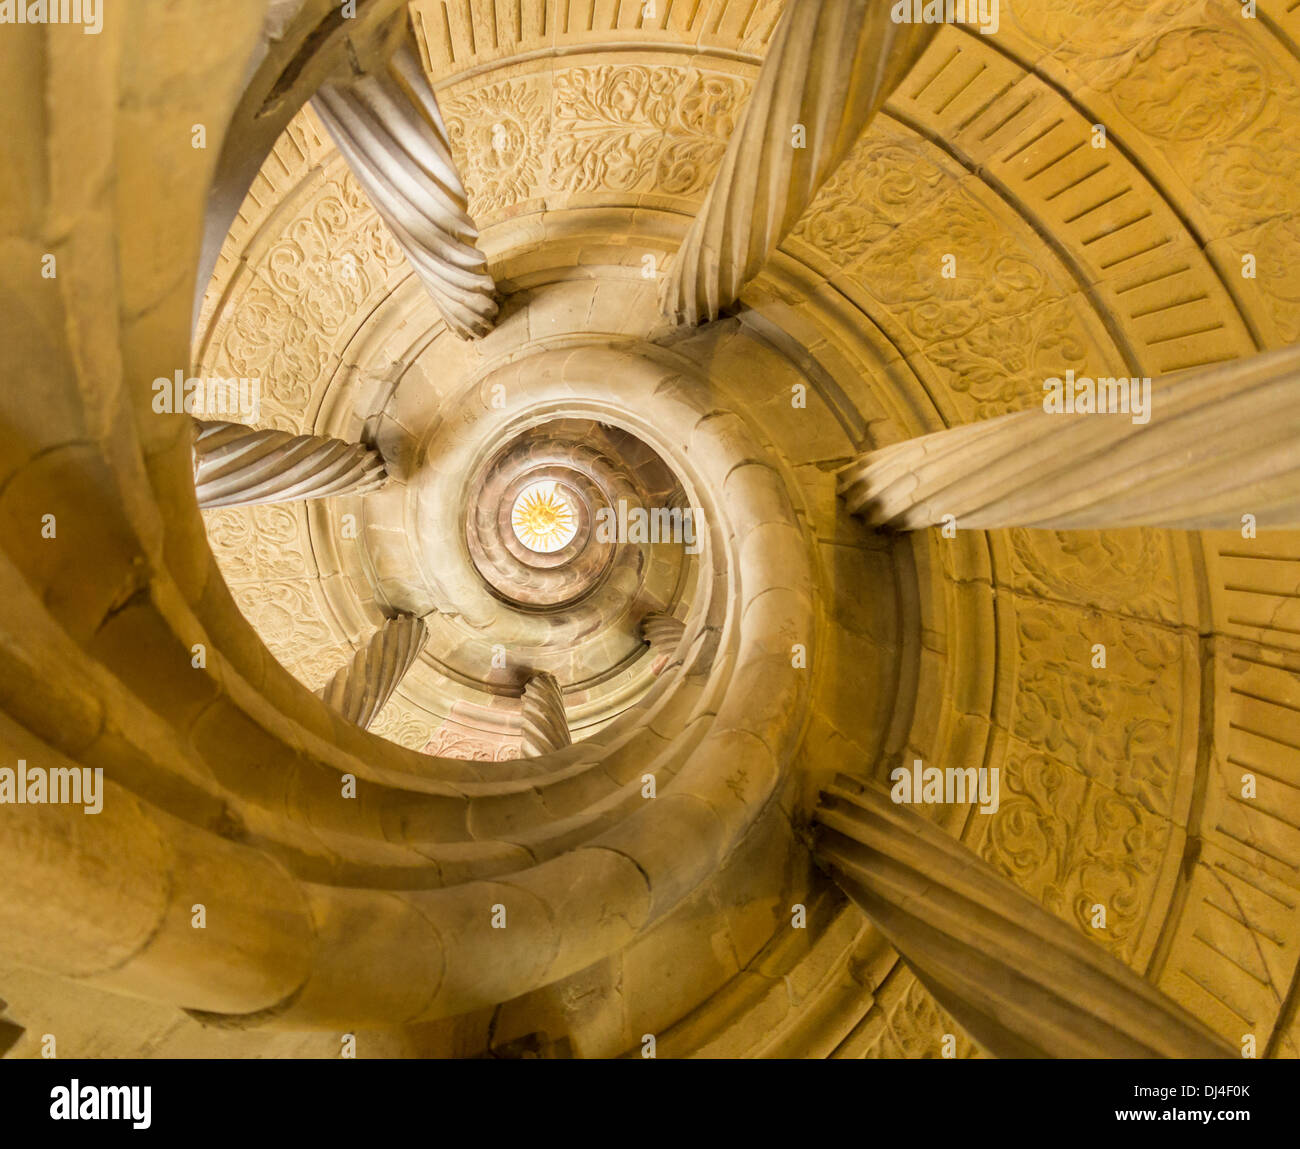 Stone spiral staircase in the Deutschordensschloss, the Teutonic Knights' castle in Bad Mergentheim, Germany, looking up Stock Photo